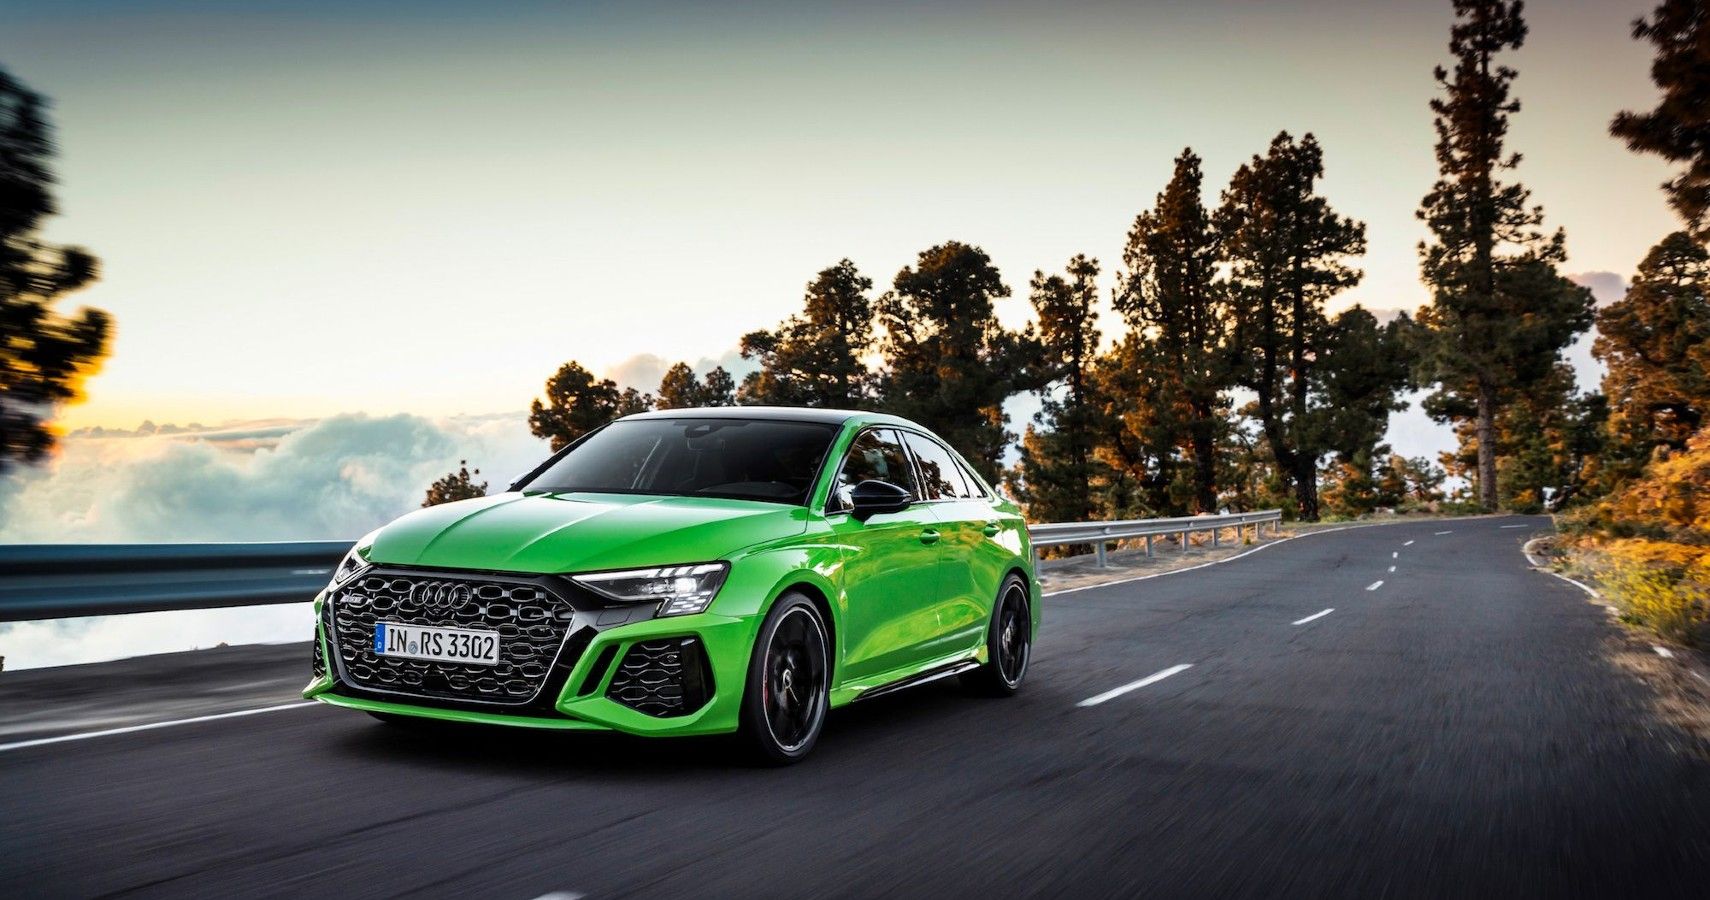 An Image Of A Green 2022 Audi RS3